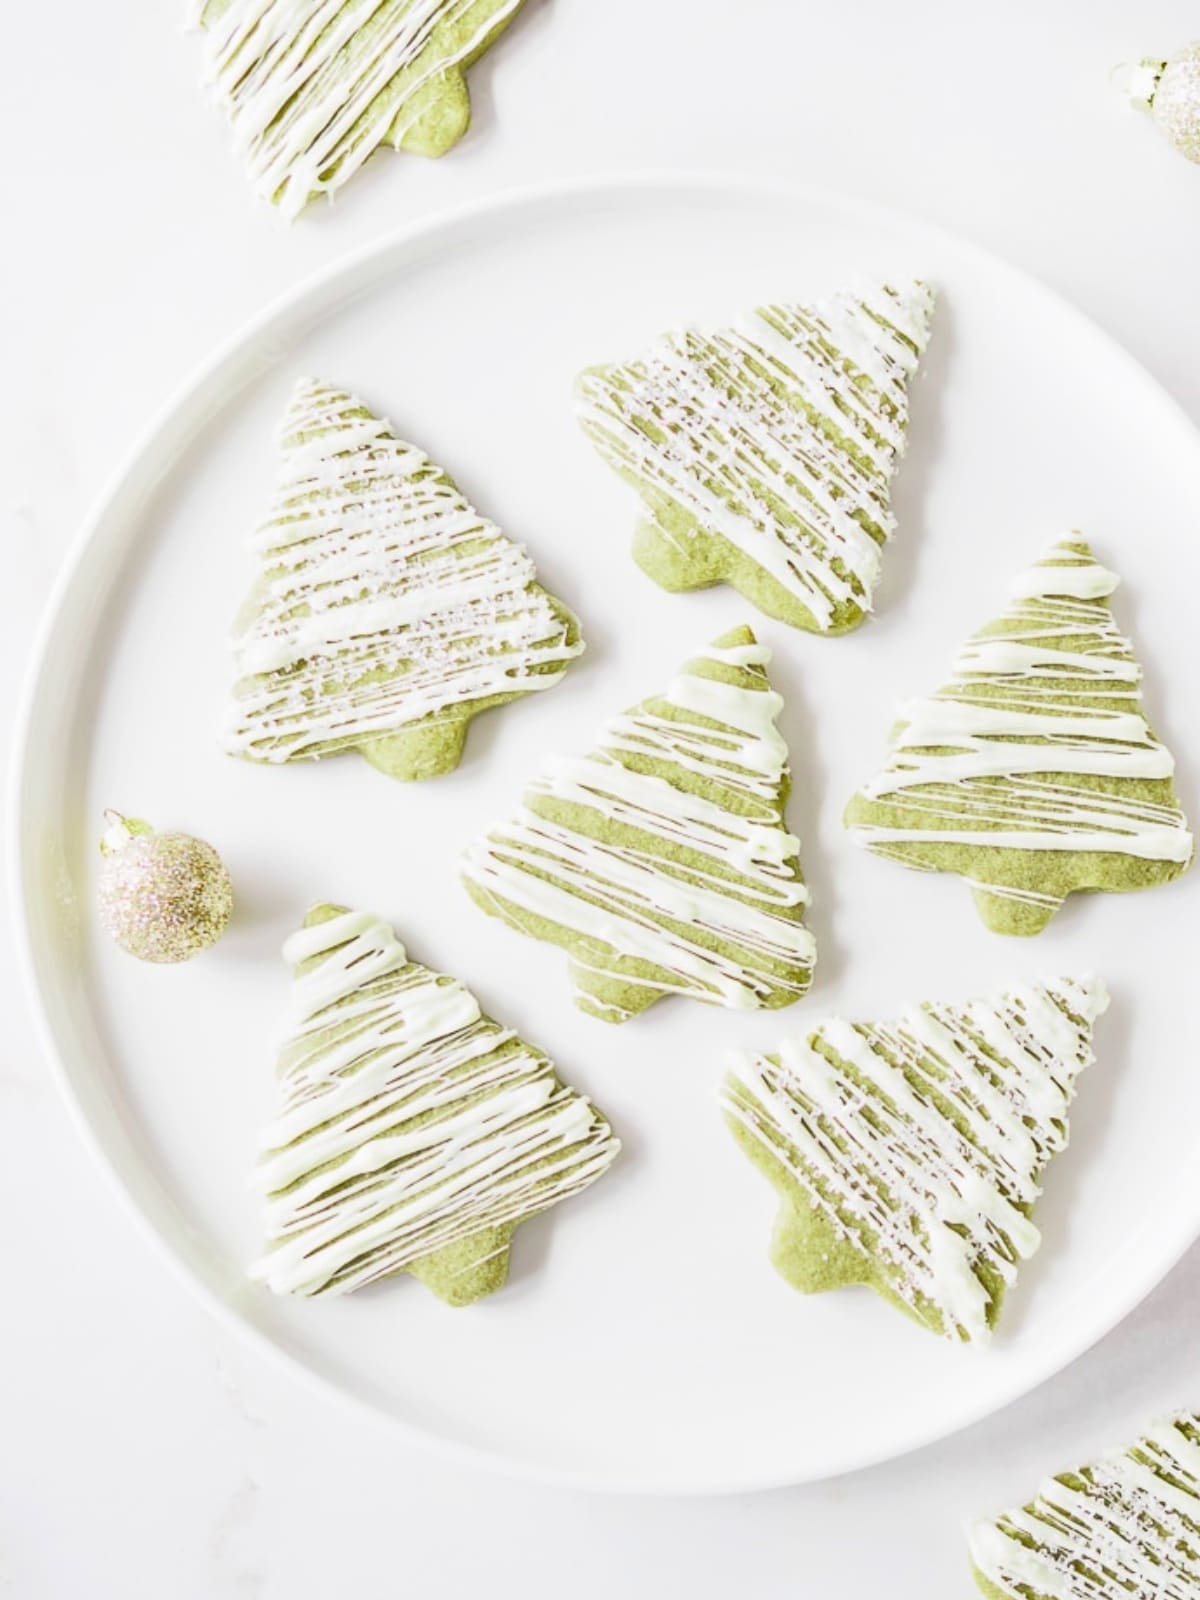 Matcha sugar cookies drizzled with white chocolate icing on white dish.